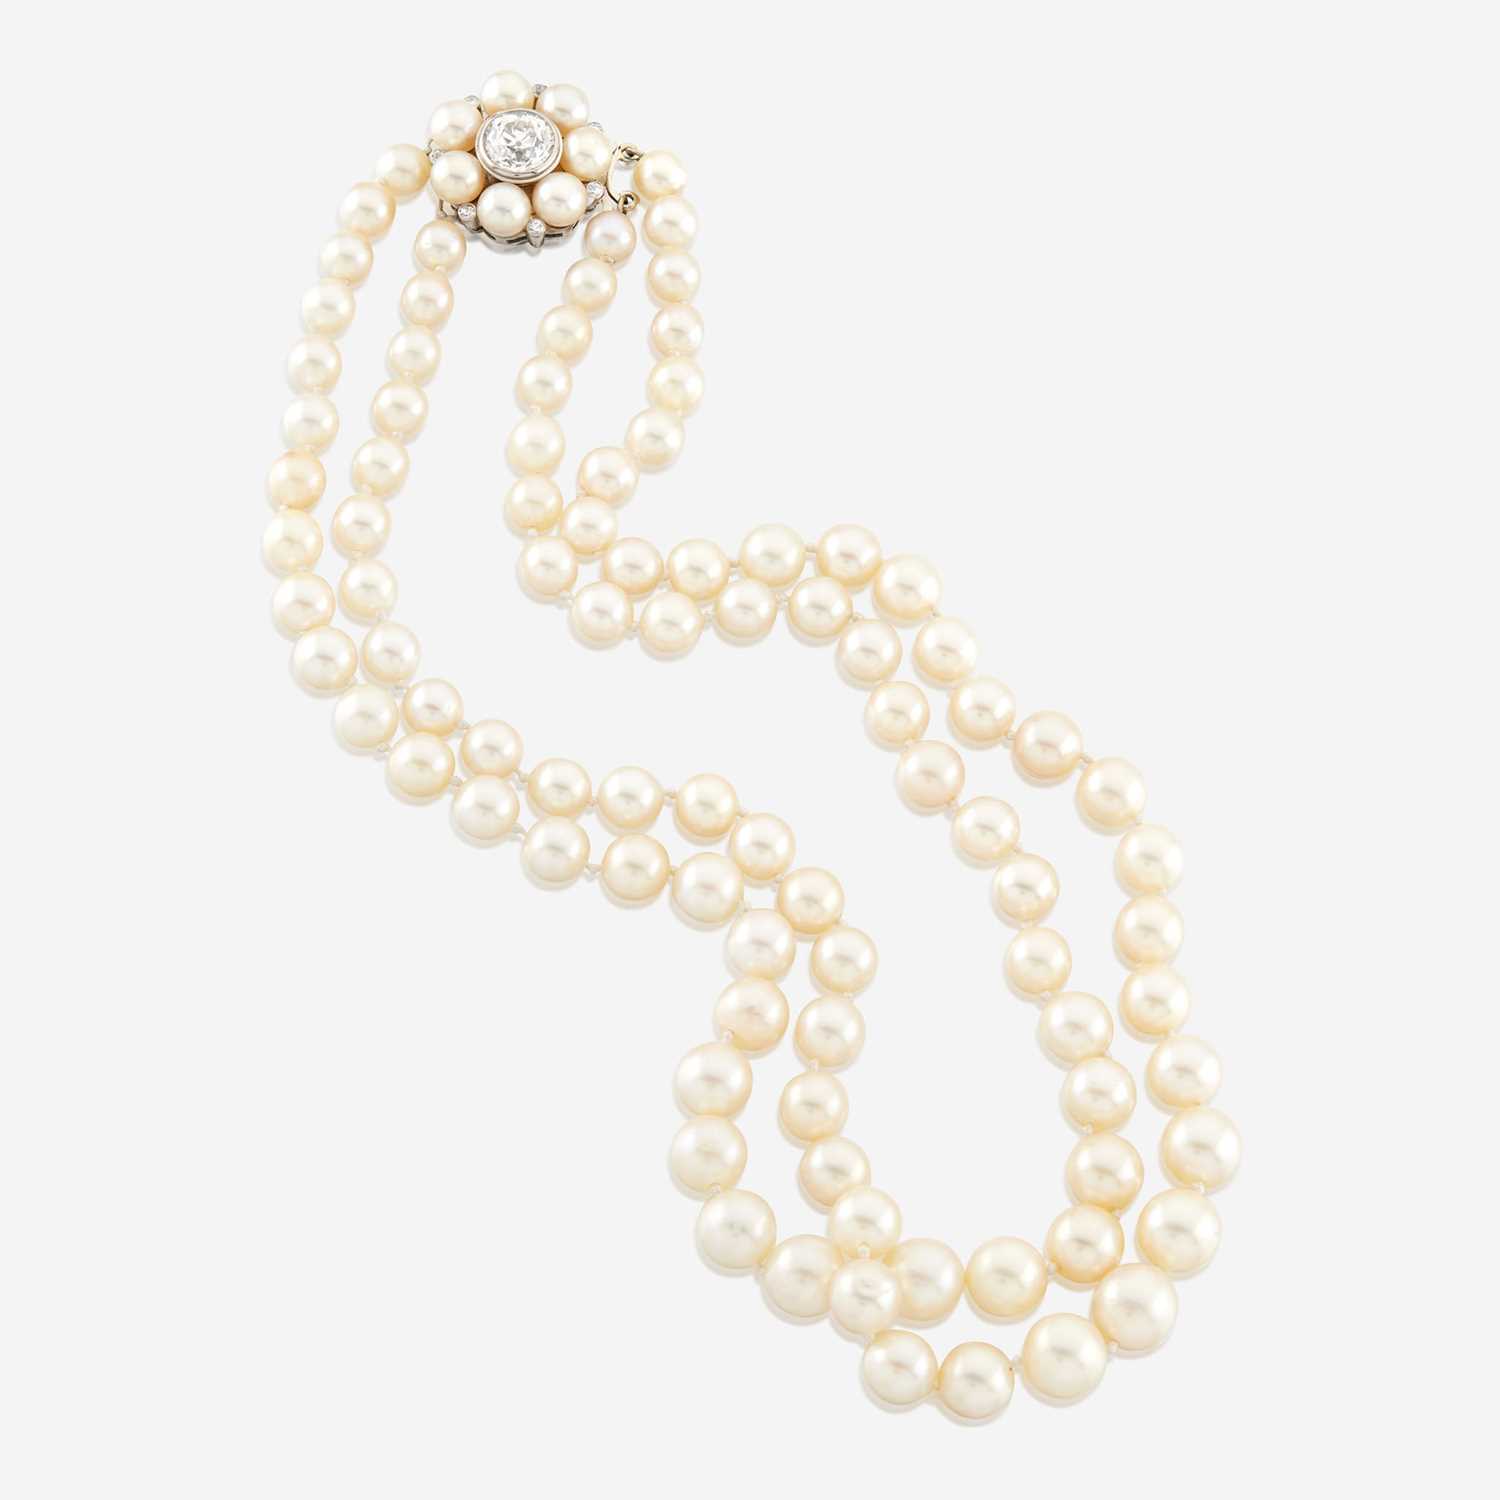 Lot 10 - A cultured pearl, diamond, and white gold necklace